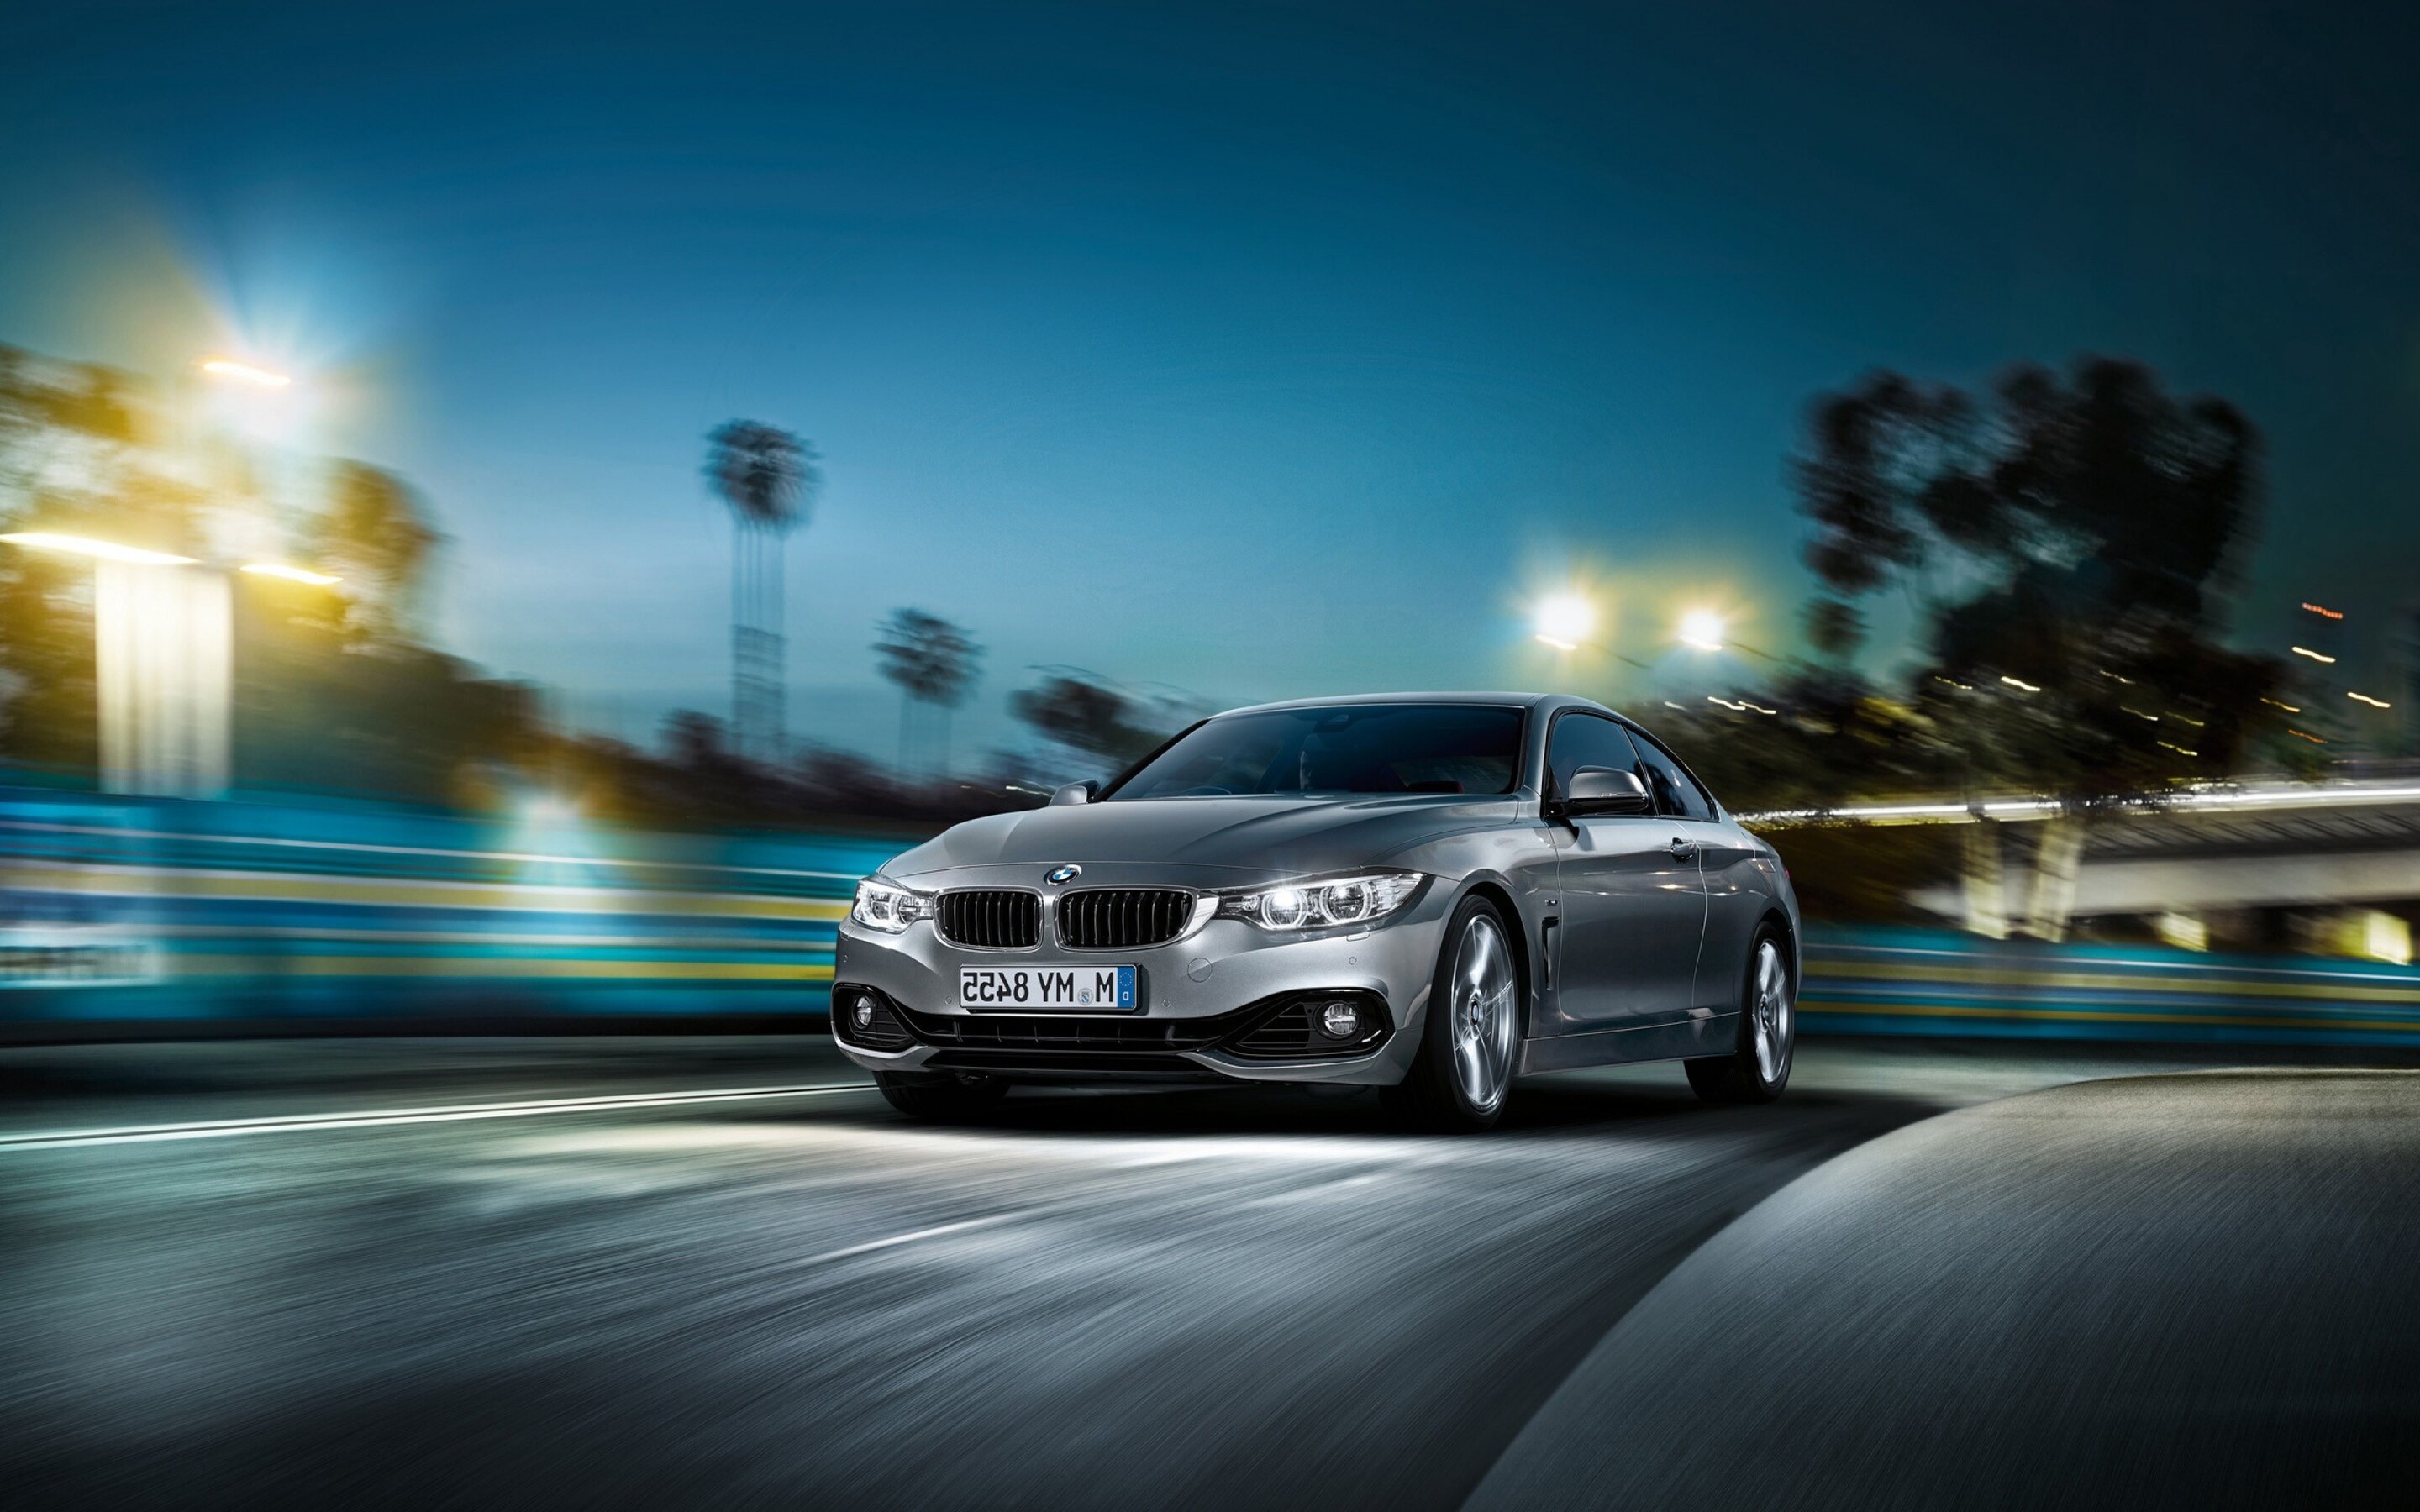 BMW 4 Series Coupe, MacBook Pro 4K wallpapers, Automotive excellence, Visual perfection, 2880x1800 HD Desktop